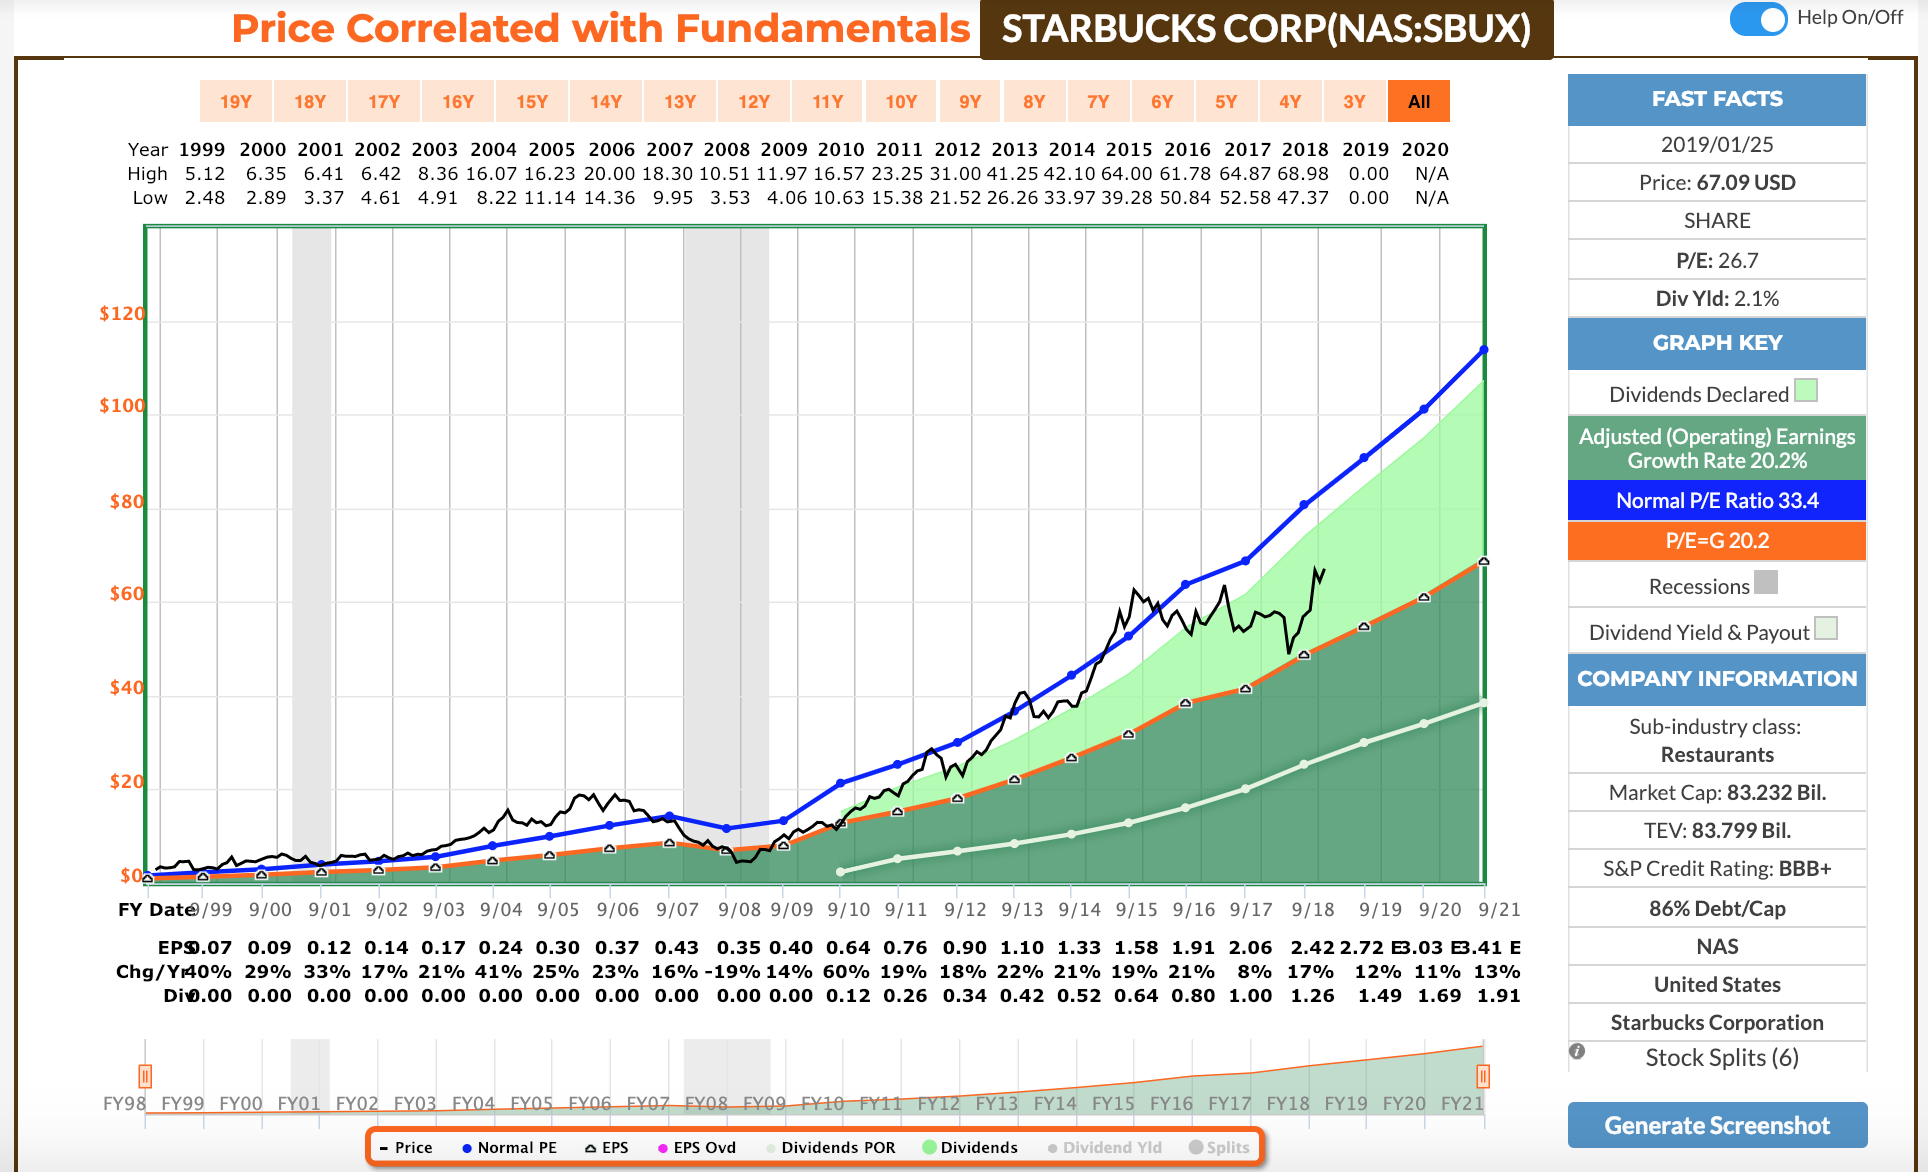 What To Do With Starbucks After Earnings? Starbucks Corporation